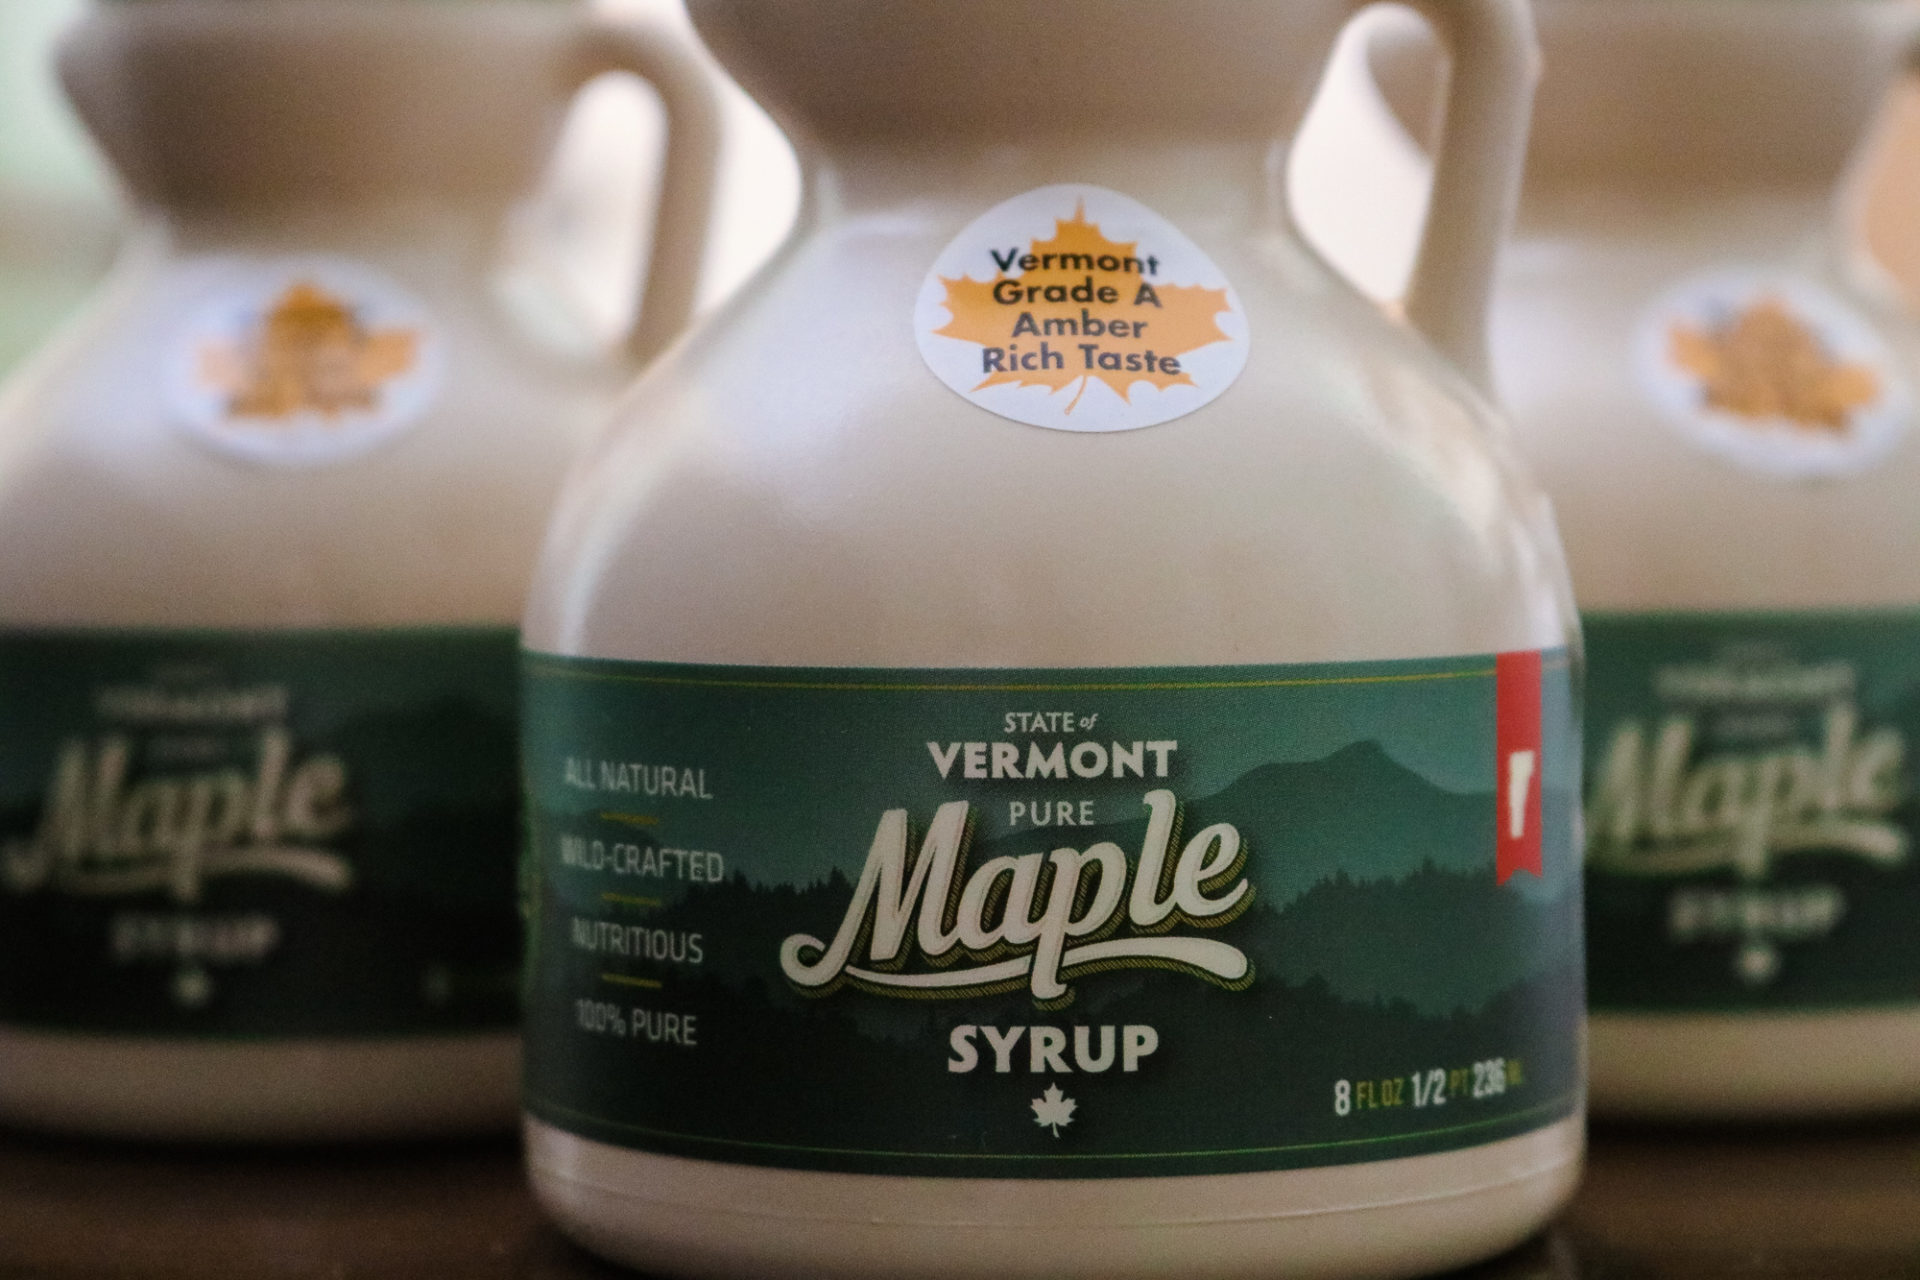 Vermont maple syrup containers